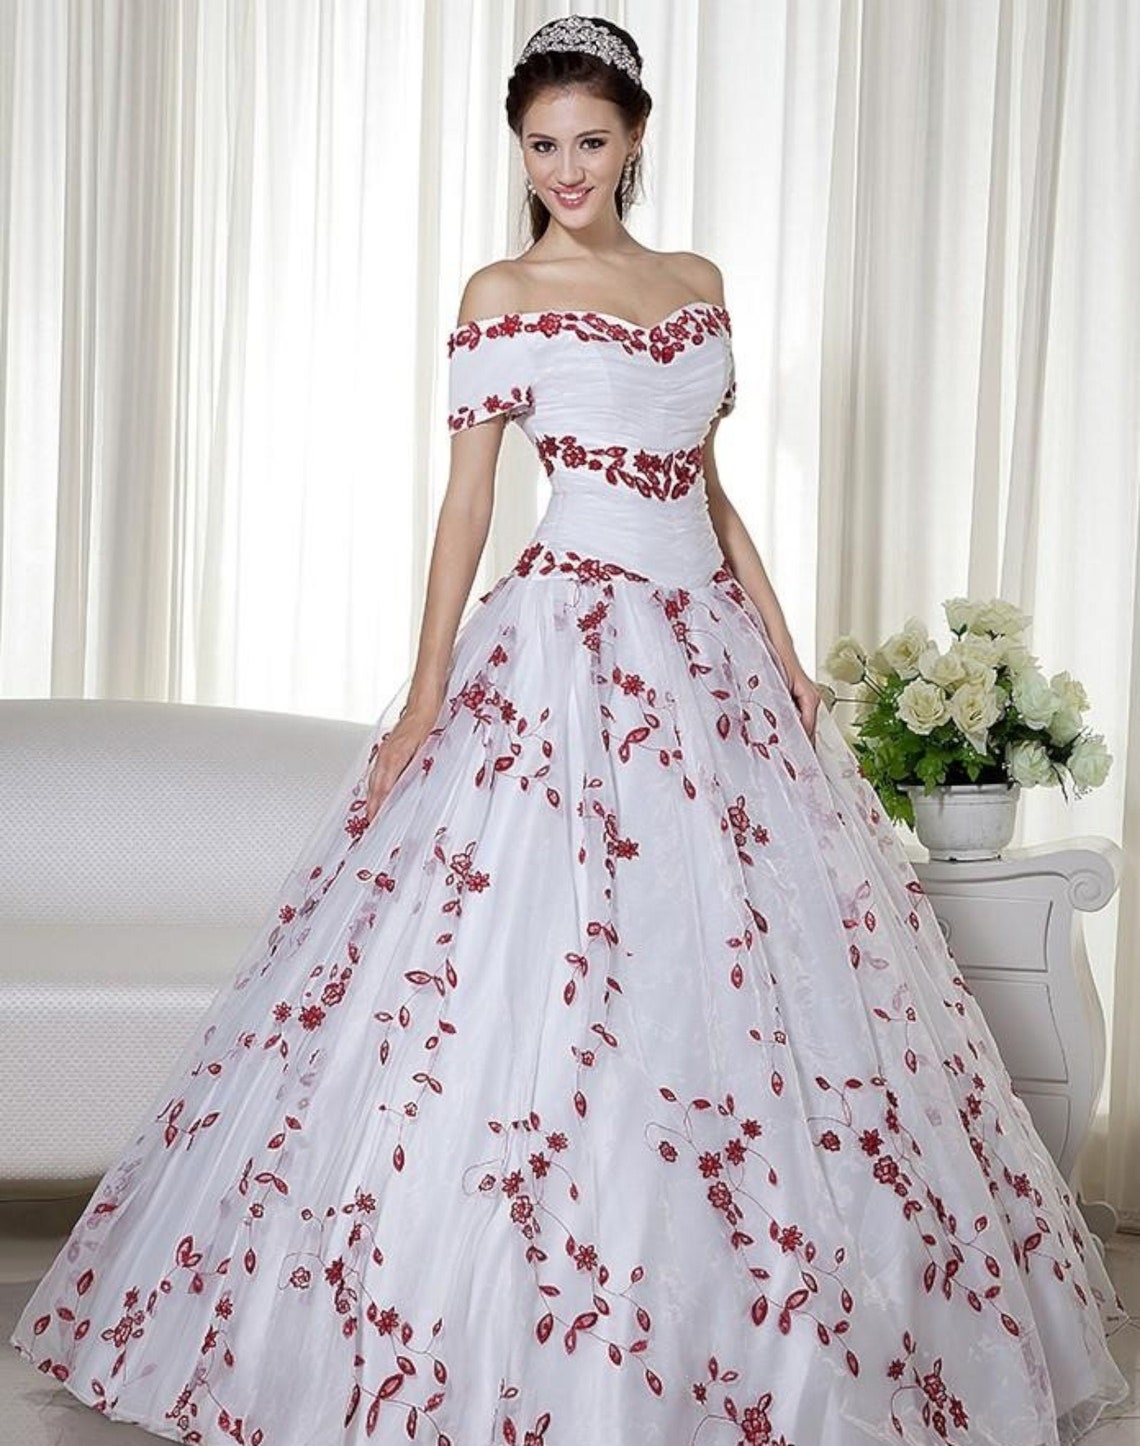 Magnificent White with Red Roses Princess Wedding Dress Bridal | Etsy